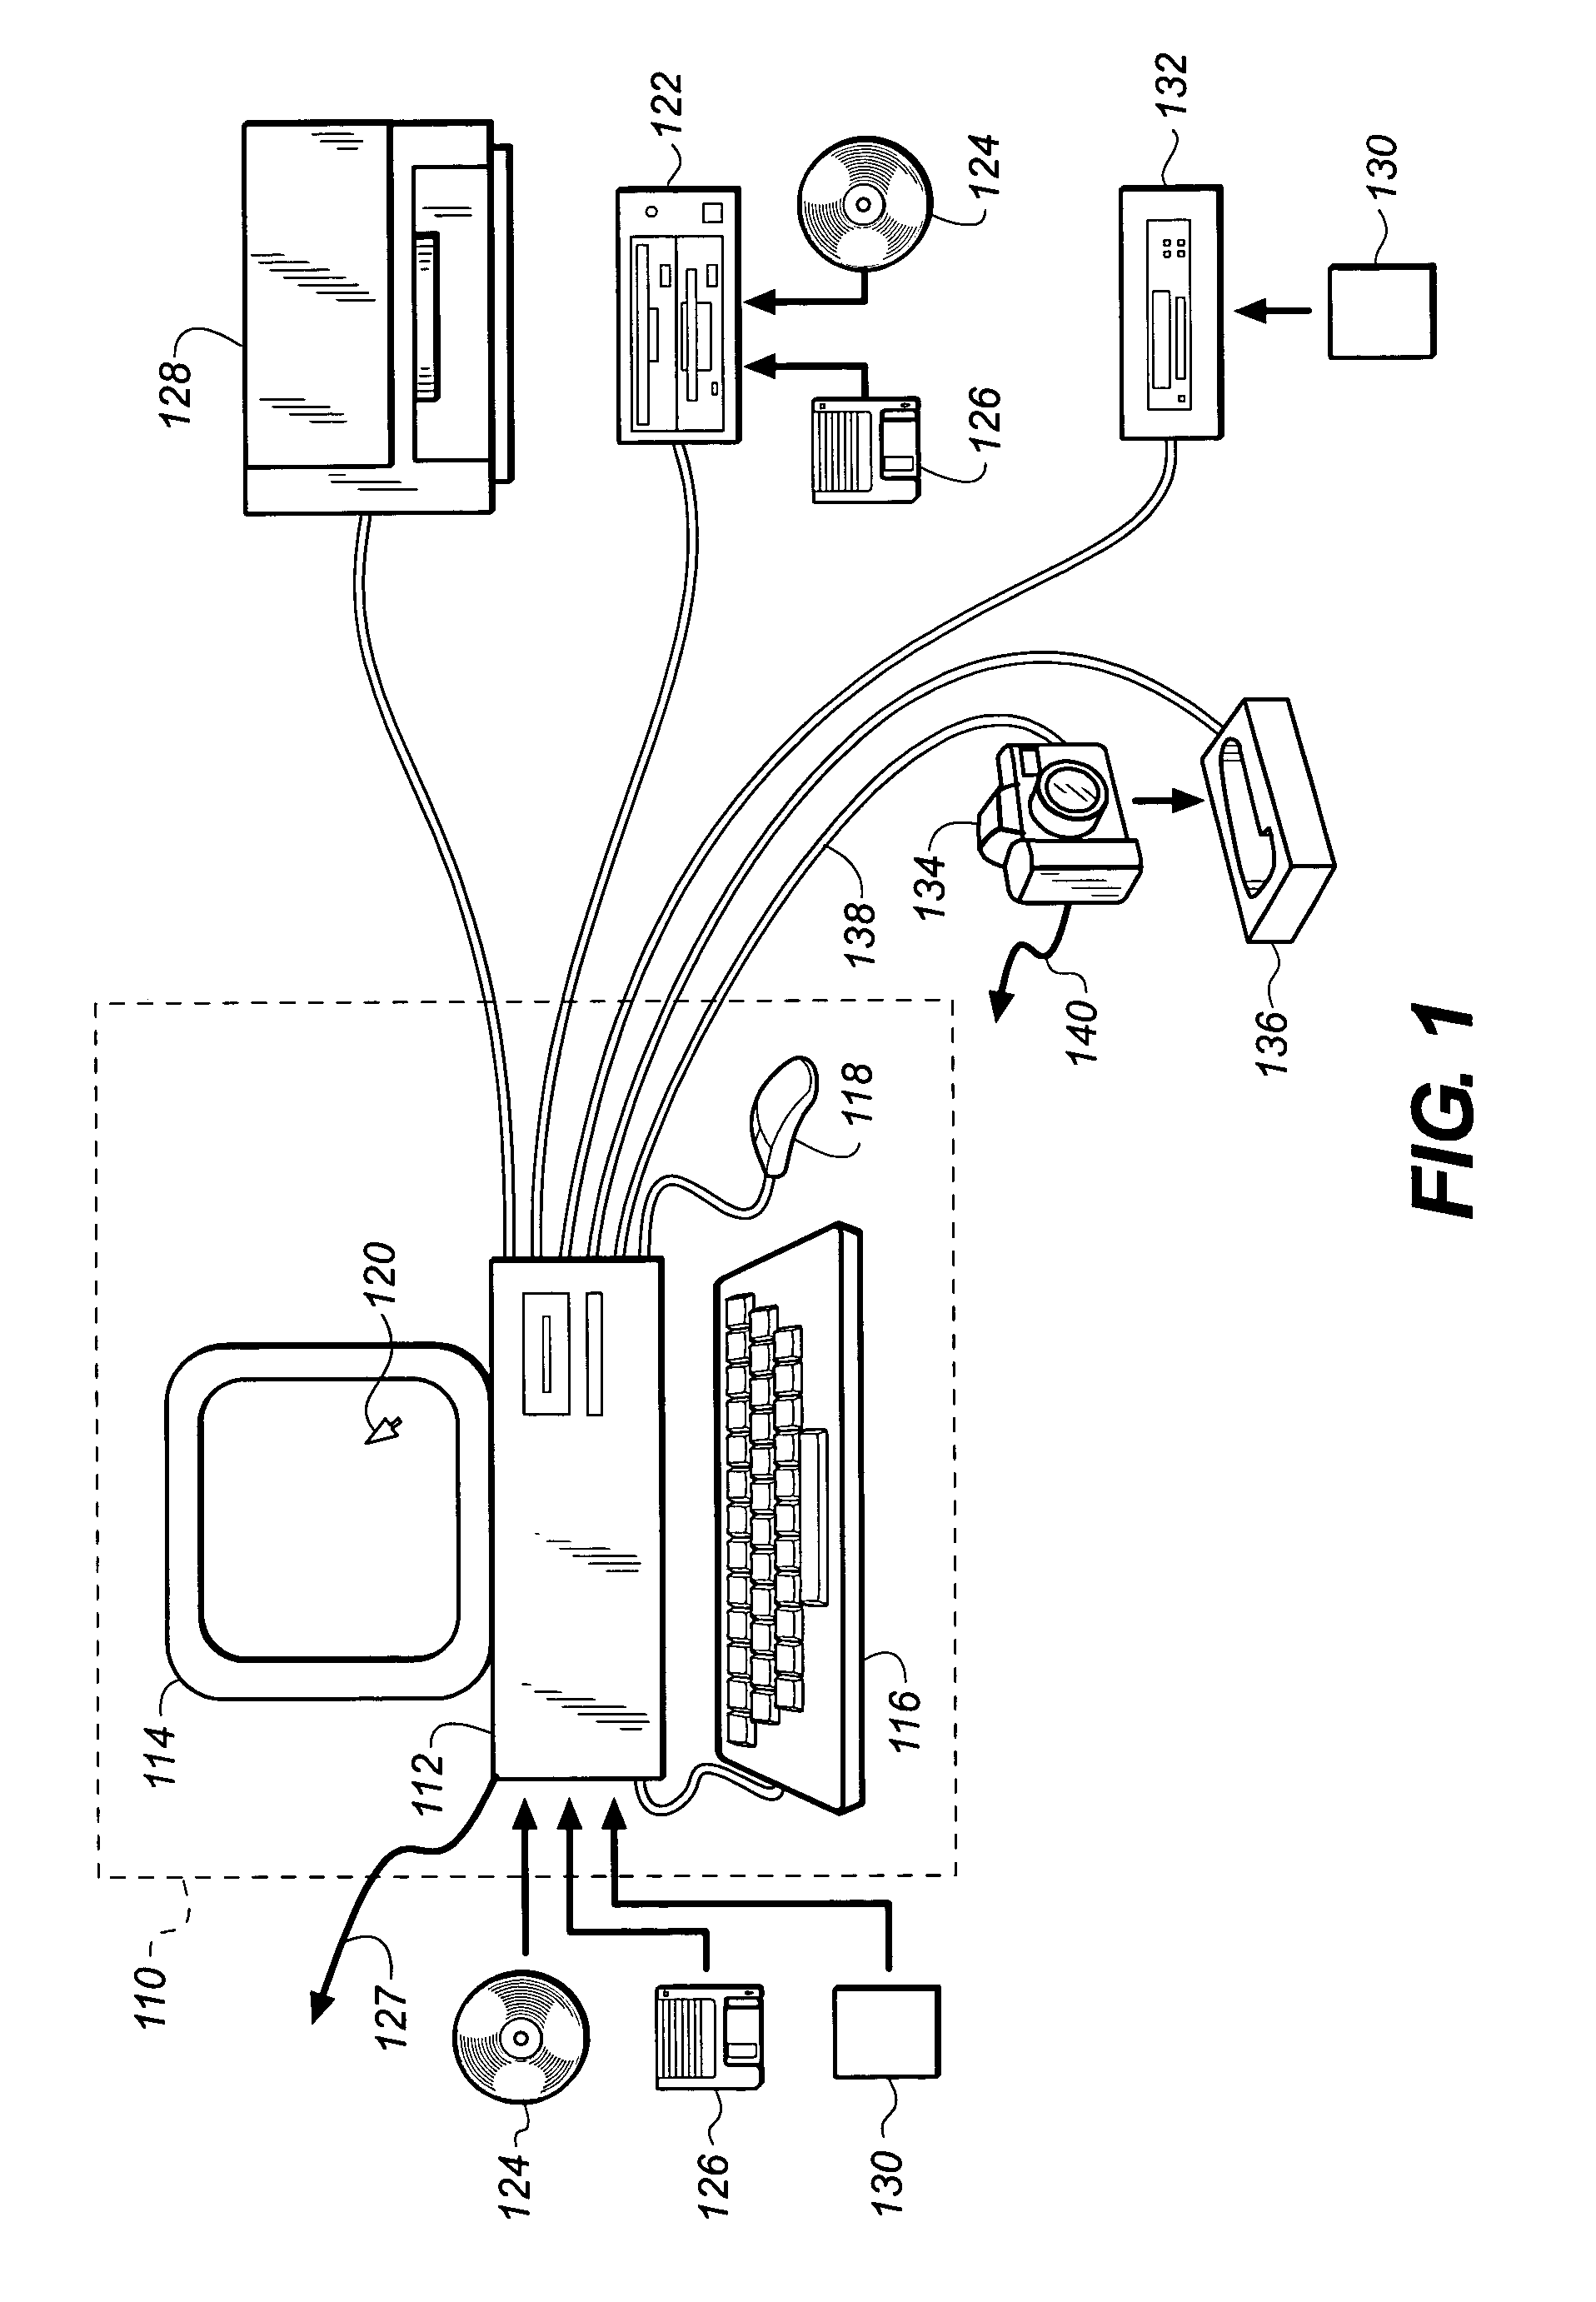 Method for selecting an emphasis image from an image collection based upon content recognition